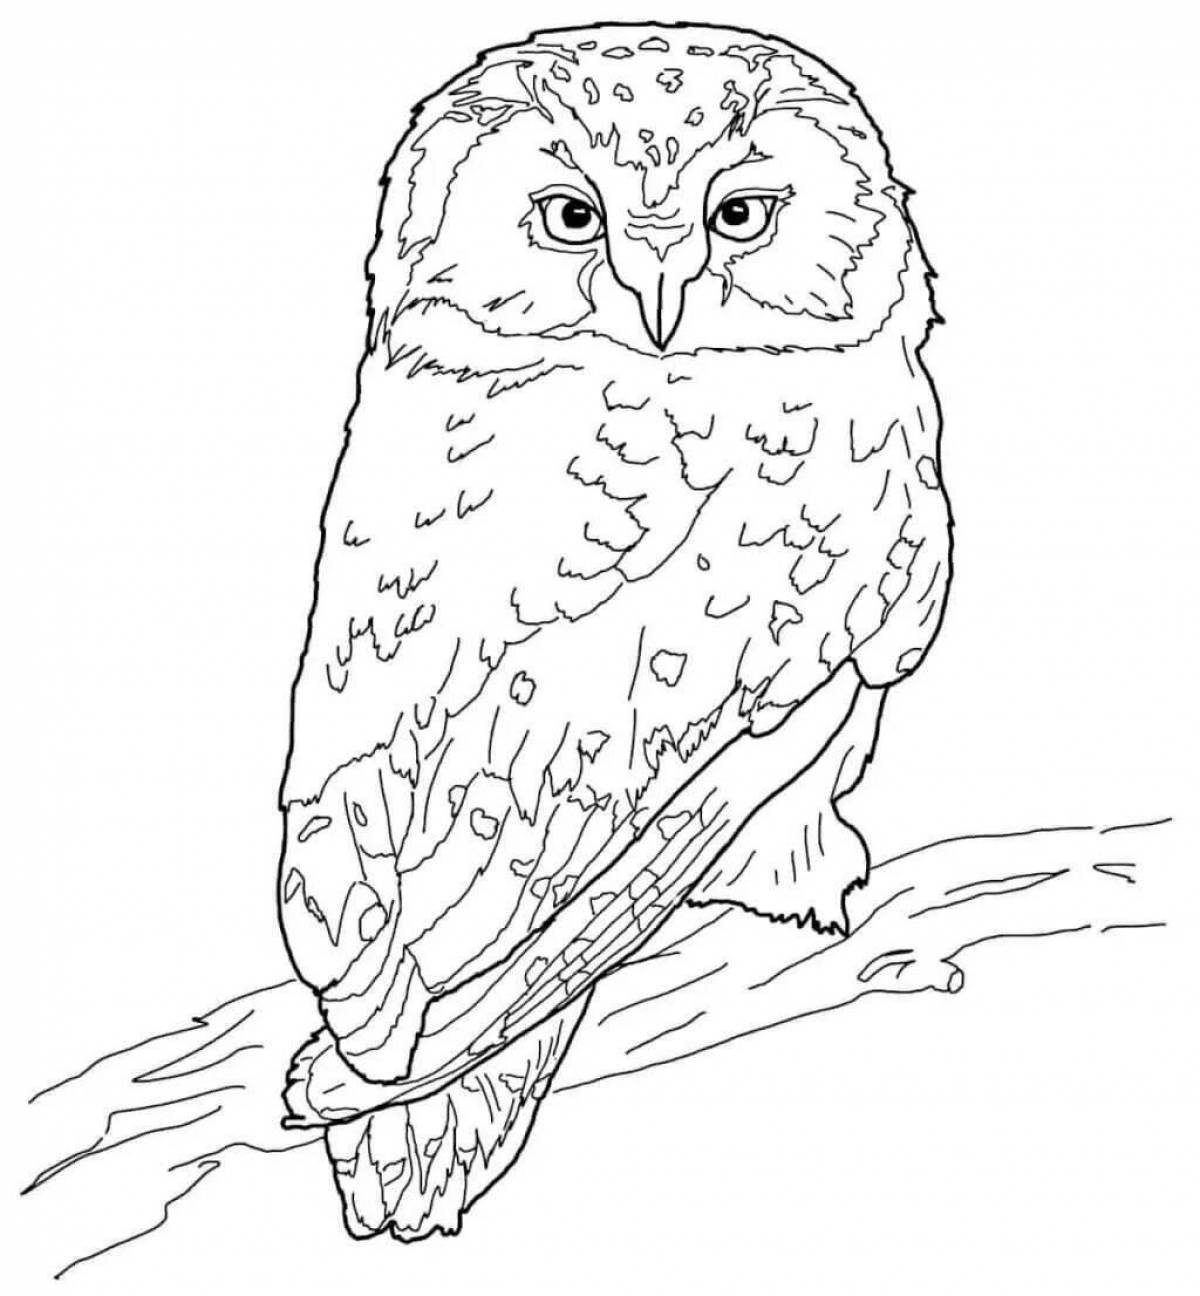 Coloring book of the noble white owl